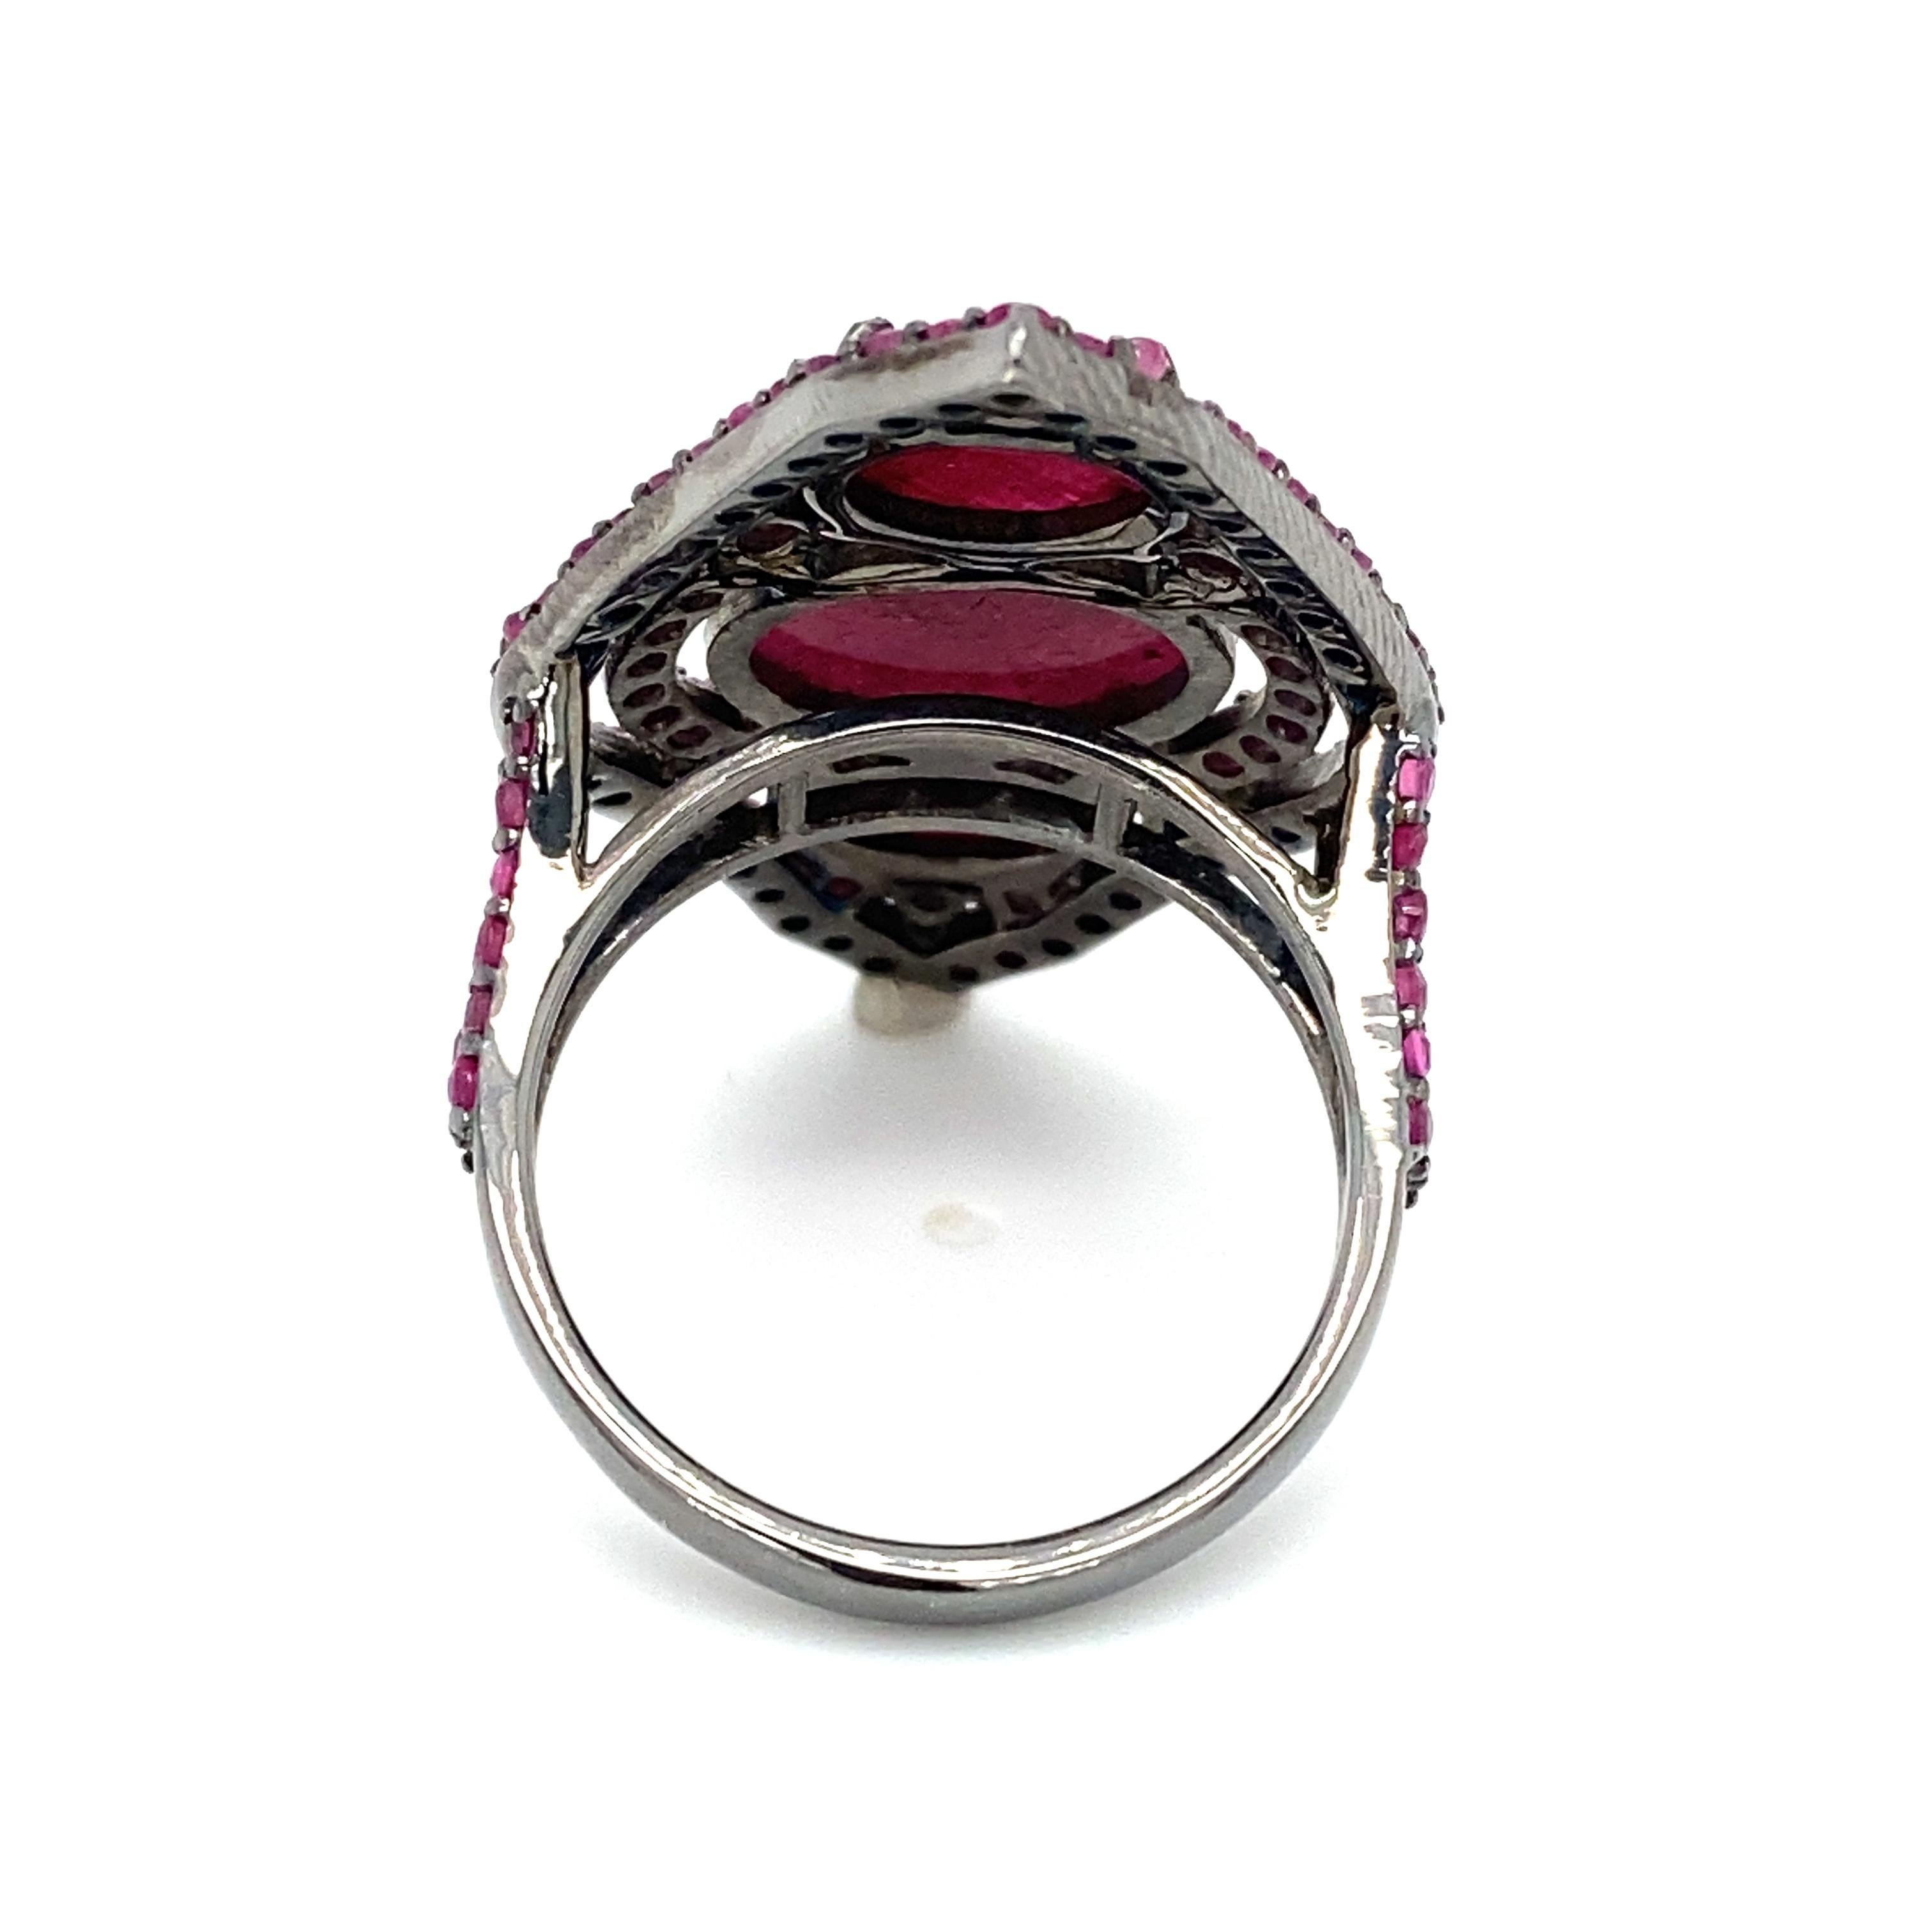 Item Details: This ring has five carats of red rubies showing common treatments. Crafted in black rhodium plated sterling silver.

Circa: 2000s
Metal Type: Sterling silver
Weight: 9.3 grams
Size: US 9.25
 